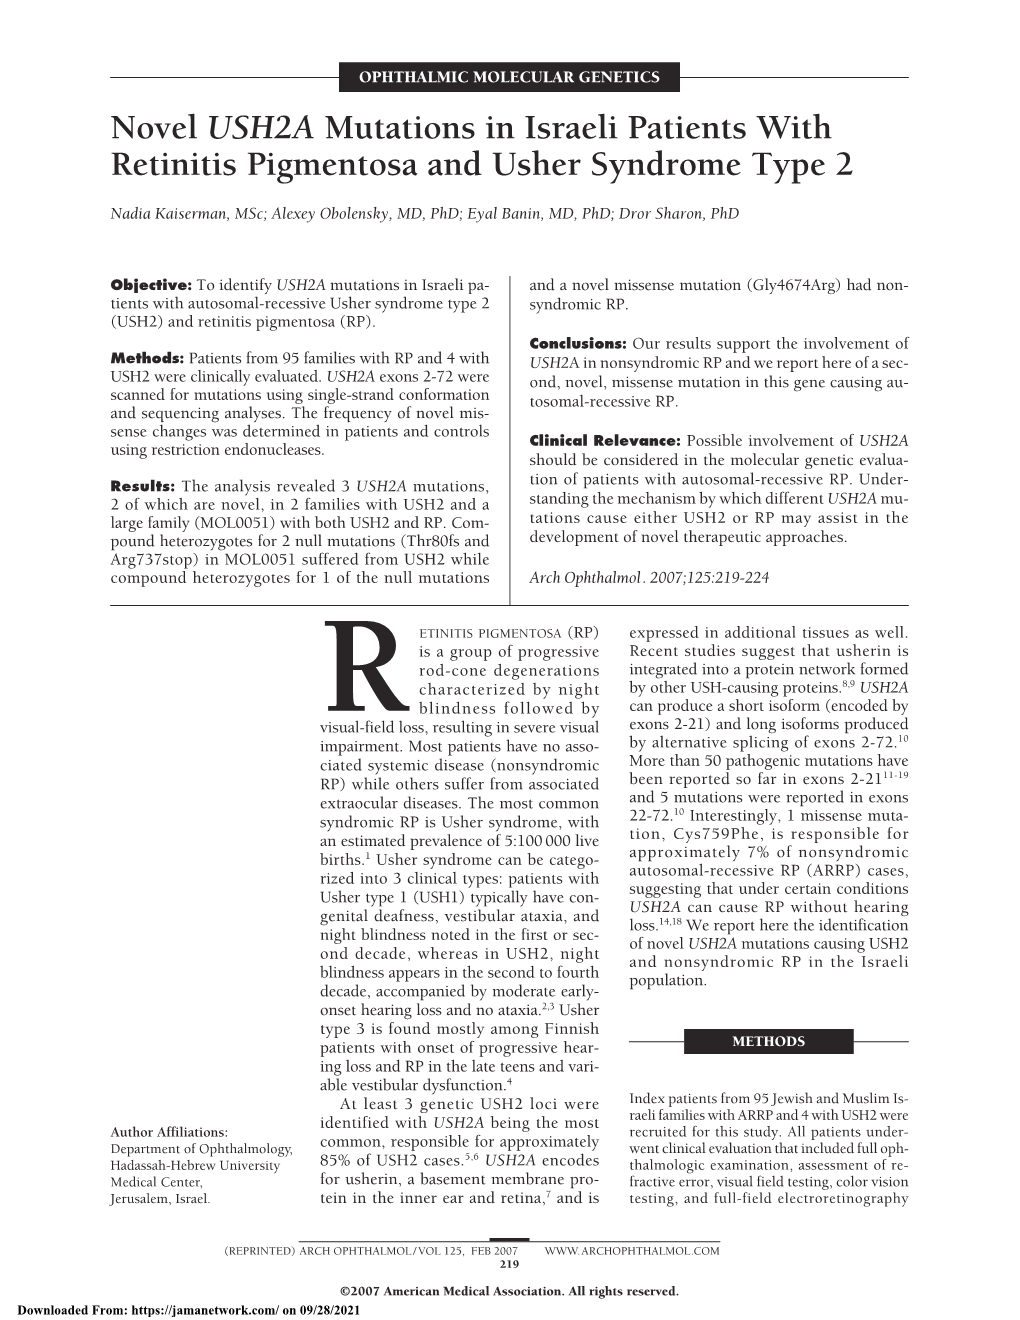 Novel USH2A Mutations in Israeli Patients with Retinitis Pigmentosa and Usher Syndrome Type 2